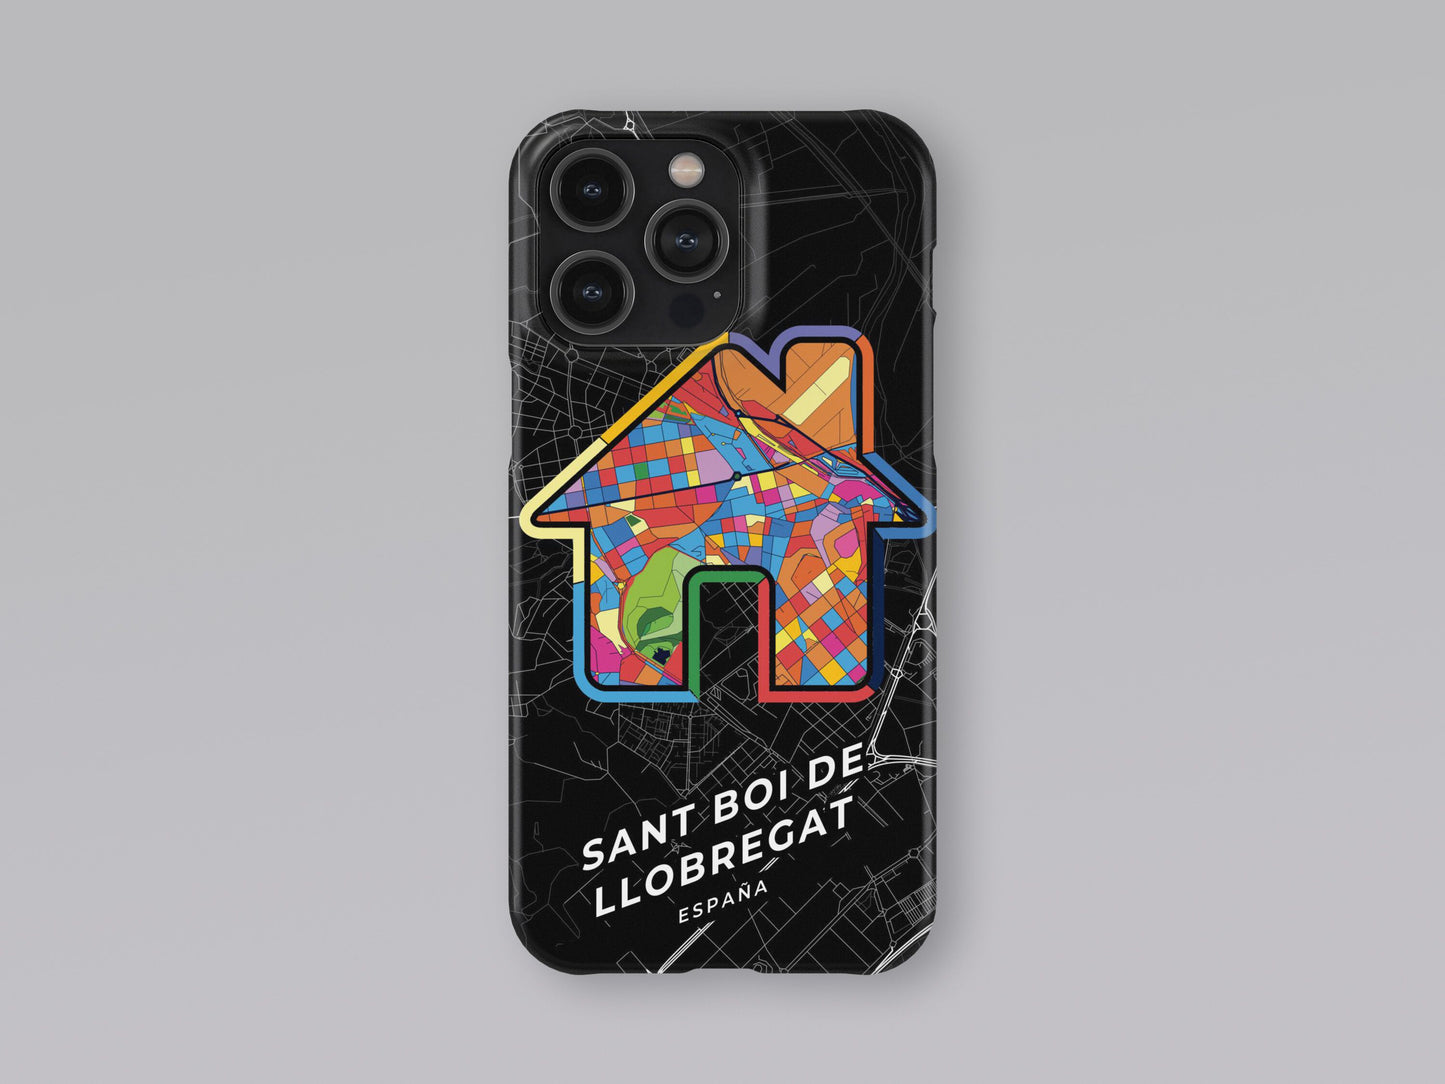 Sant Boi De Llobregat Spain slim phone case with colorful icon. Birthday, wedding or housewarming gift. Couple match cases. 3